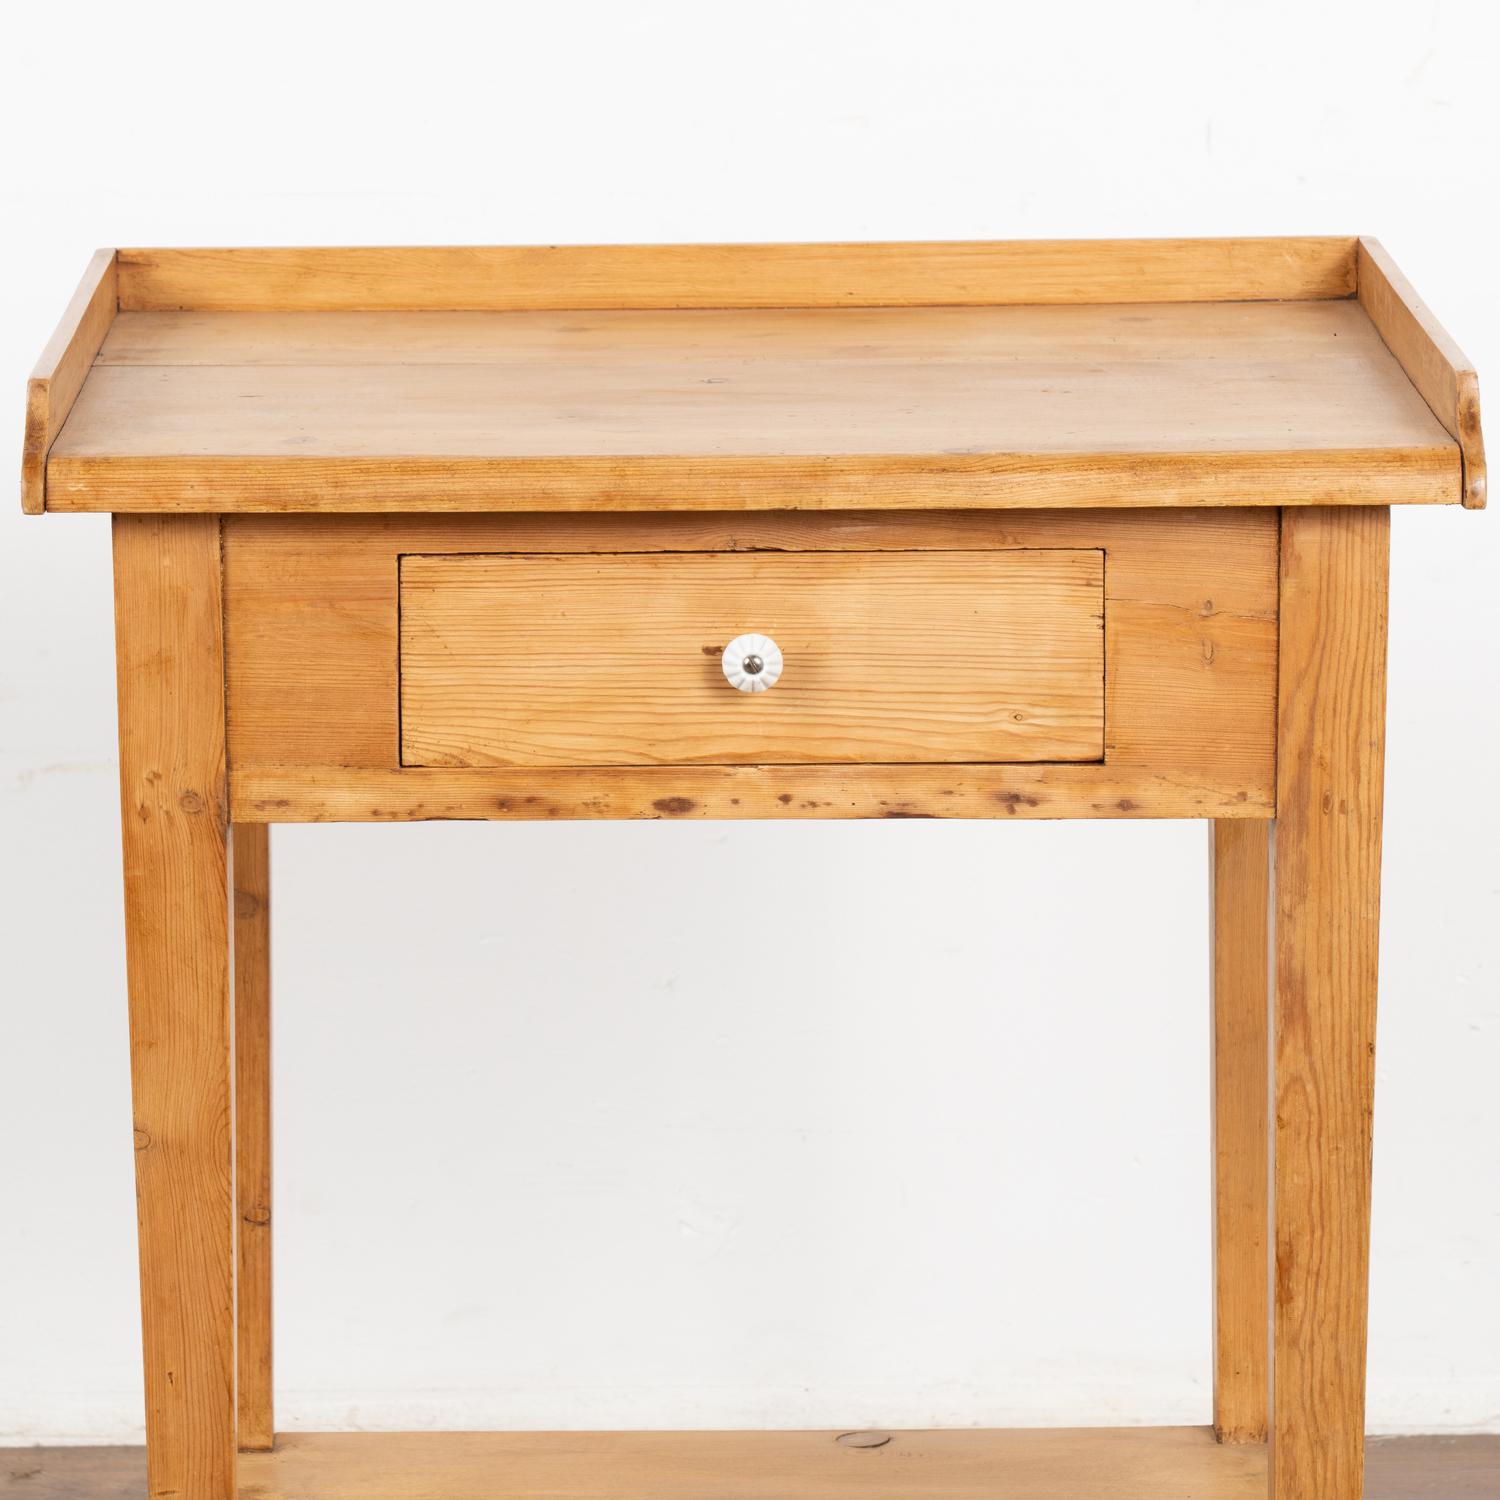 19th Century Small Pine Side Table With Drawer, Denmark circa 1890